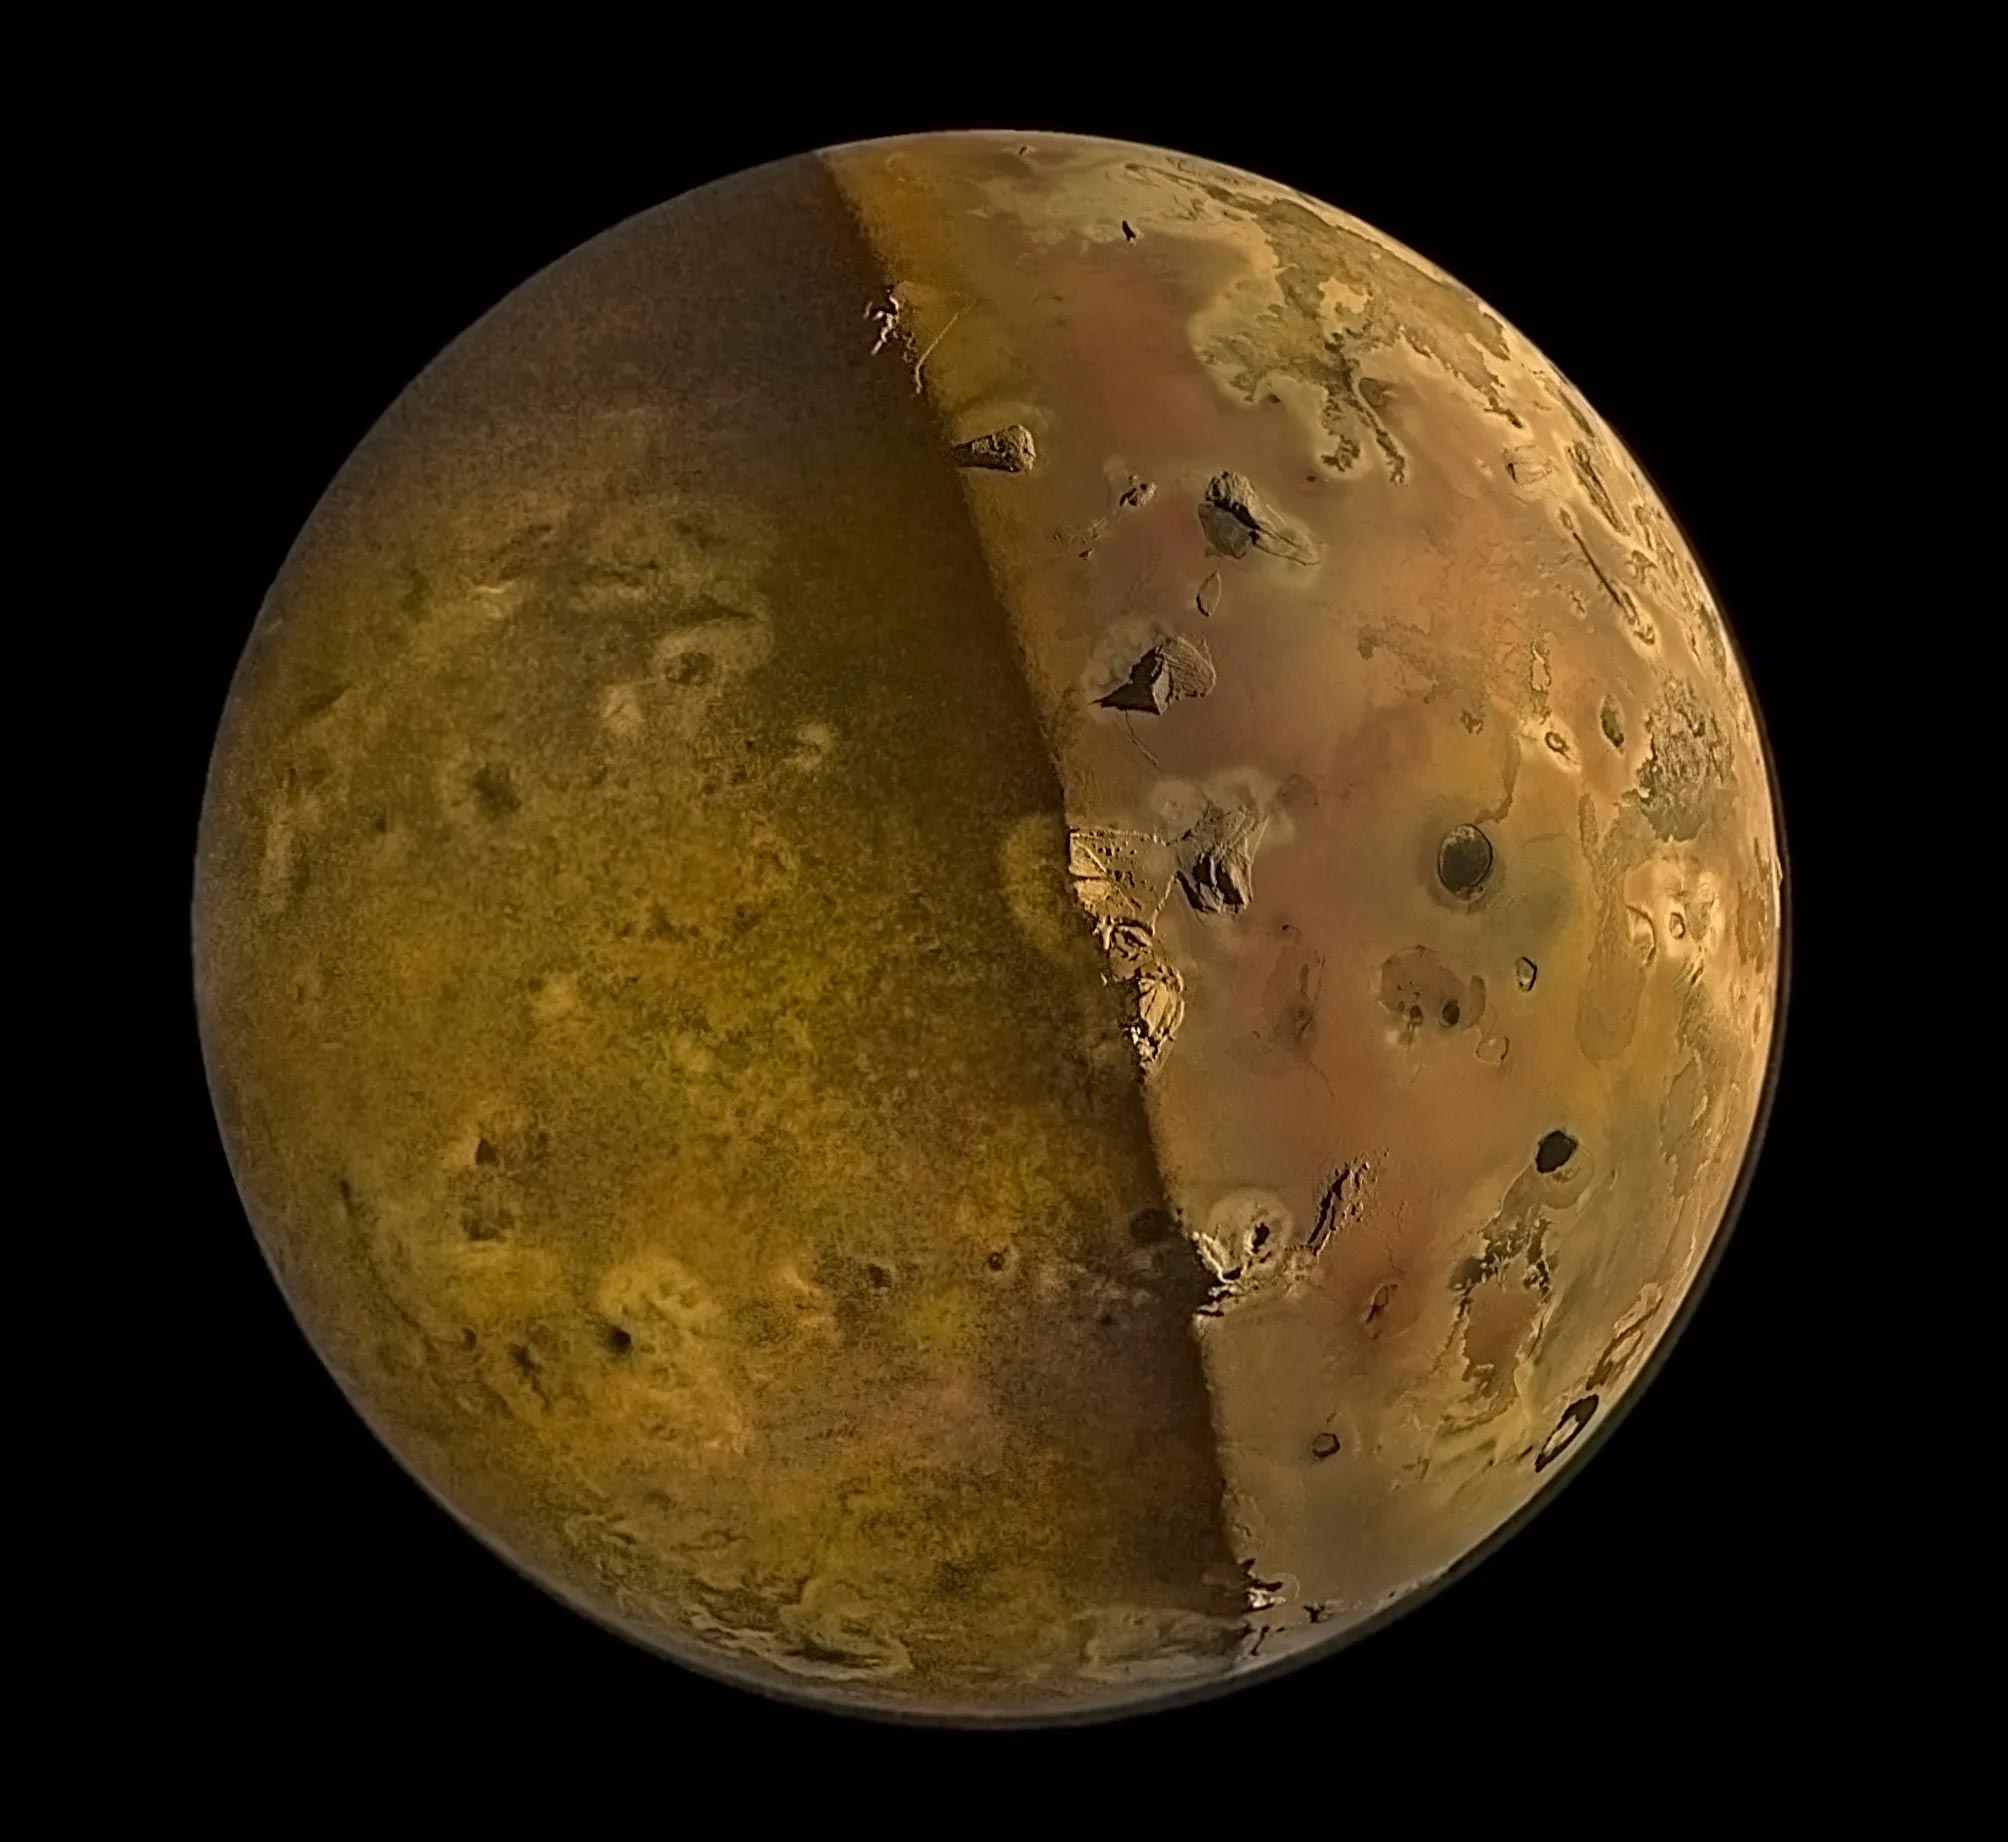 NASA's Juno captures stunning images of Jupiter's volcanic moon Io in its closest flyby yet